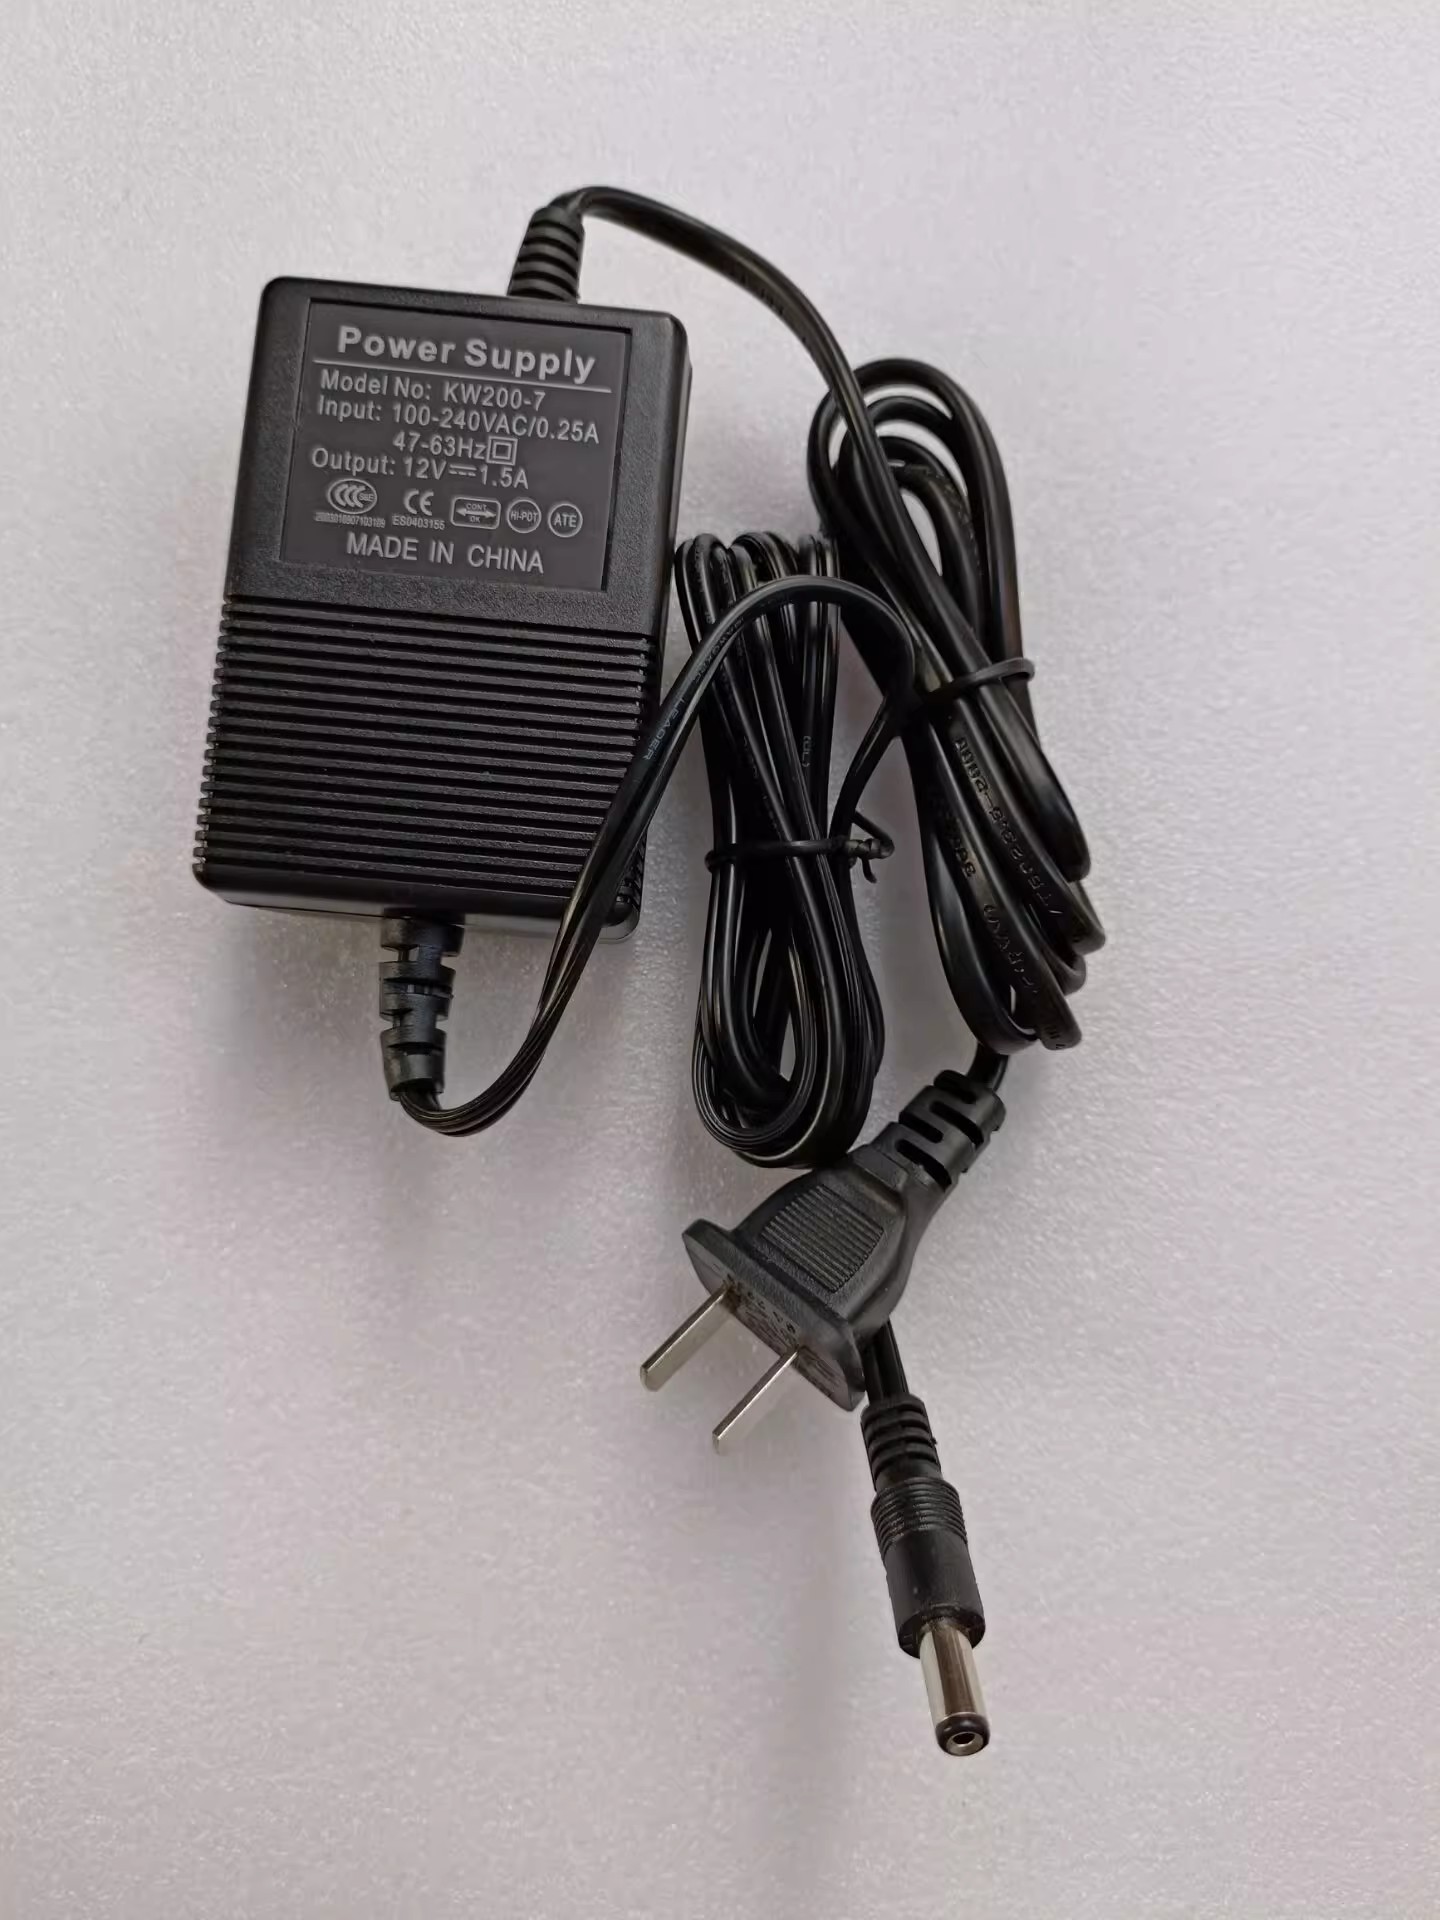 *Brand NEW* 5.5MM*2.1MM 12V 1.5A（1500MA）AC DC ADAPTHE KW200-7 POWER Supply